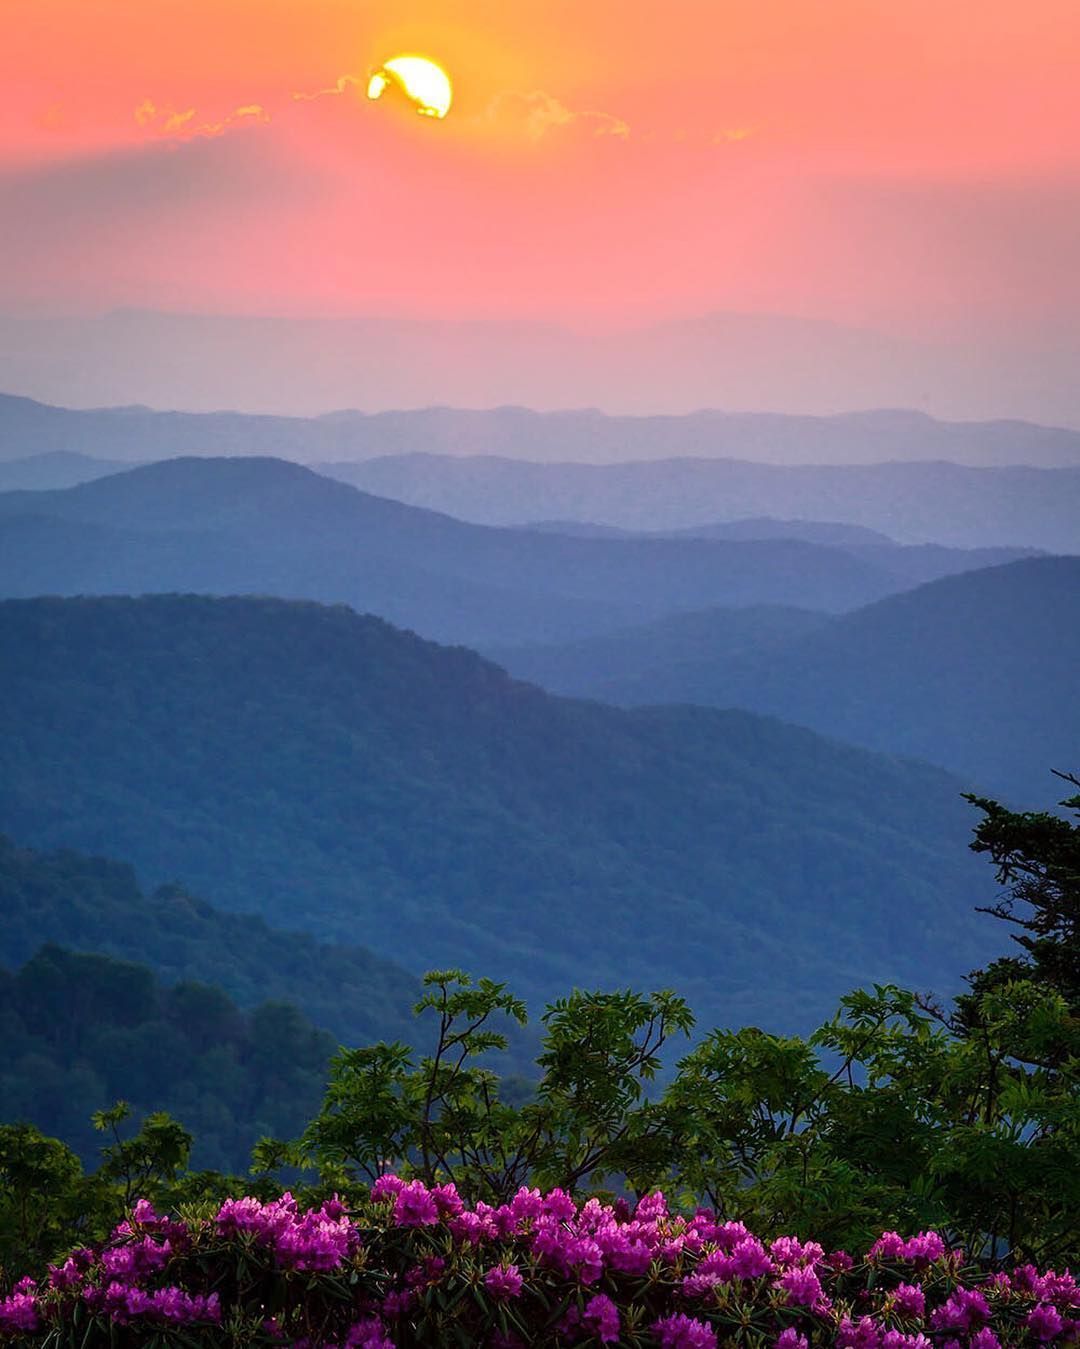 Incredible sunsets are one of the many rewards of hiking along the Appalachian Trail, a national scenic trail th. Nature photo, Mountain sunset, Beautiful nature